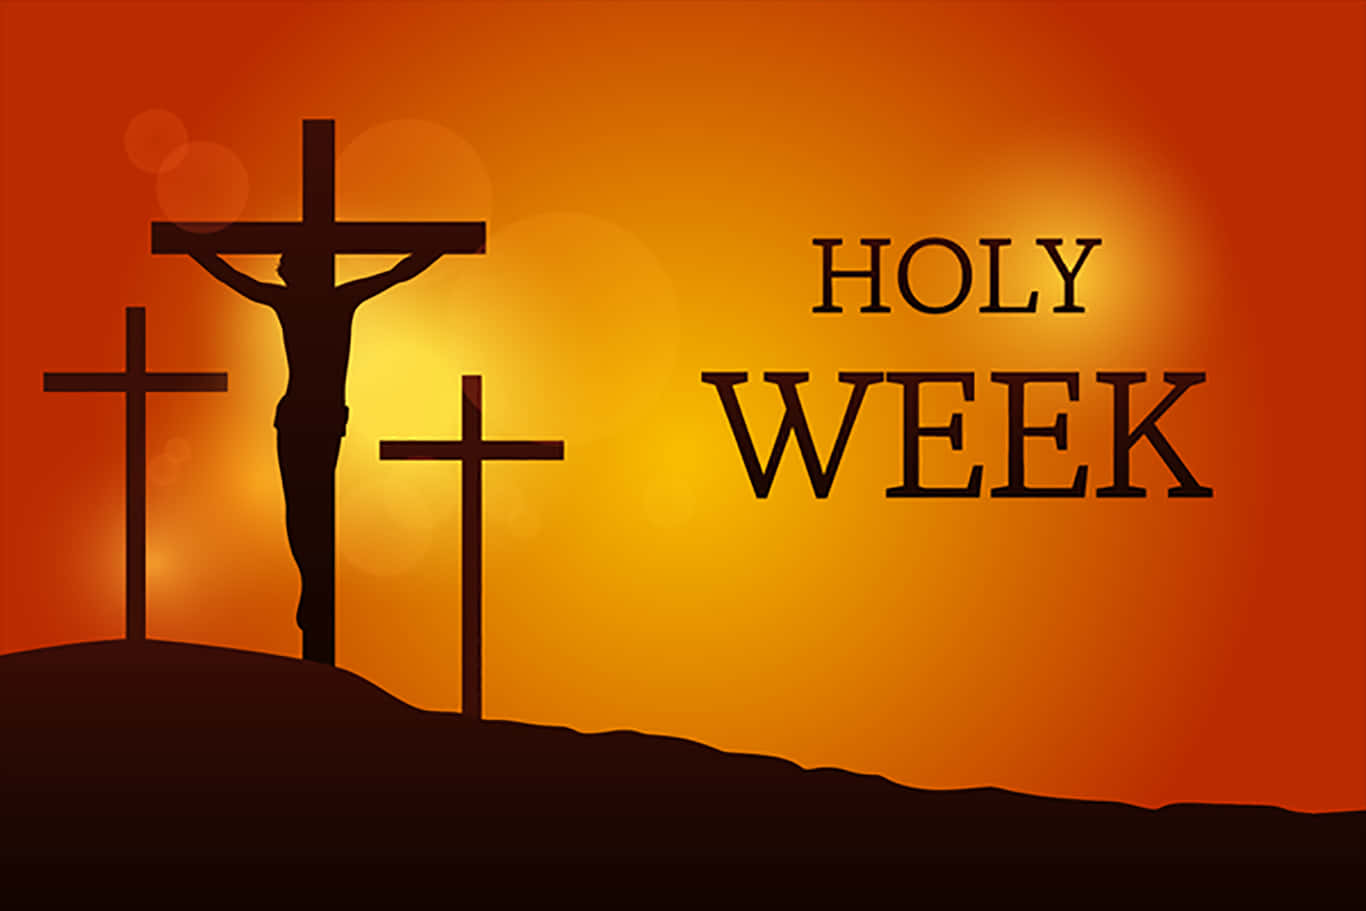 Join us in prayer during Holy Week Wallpaper